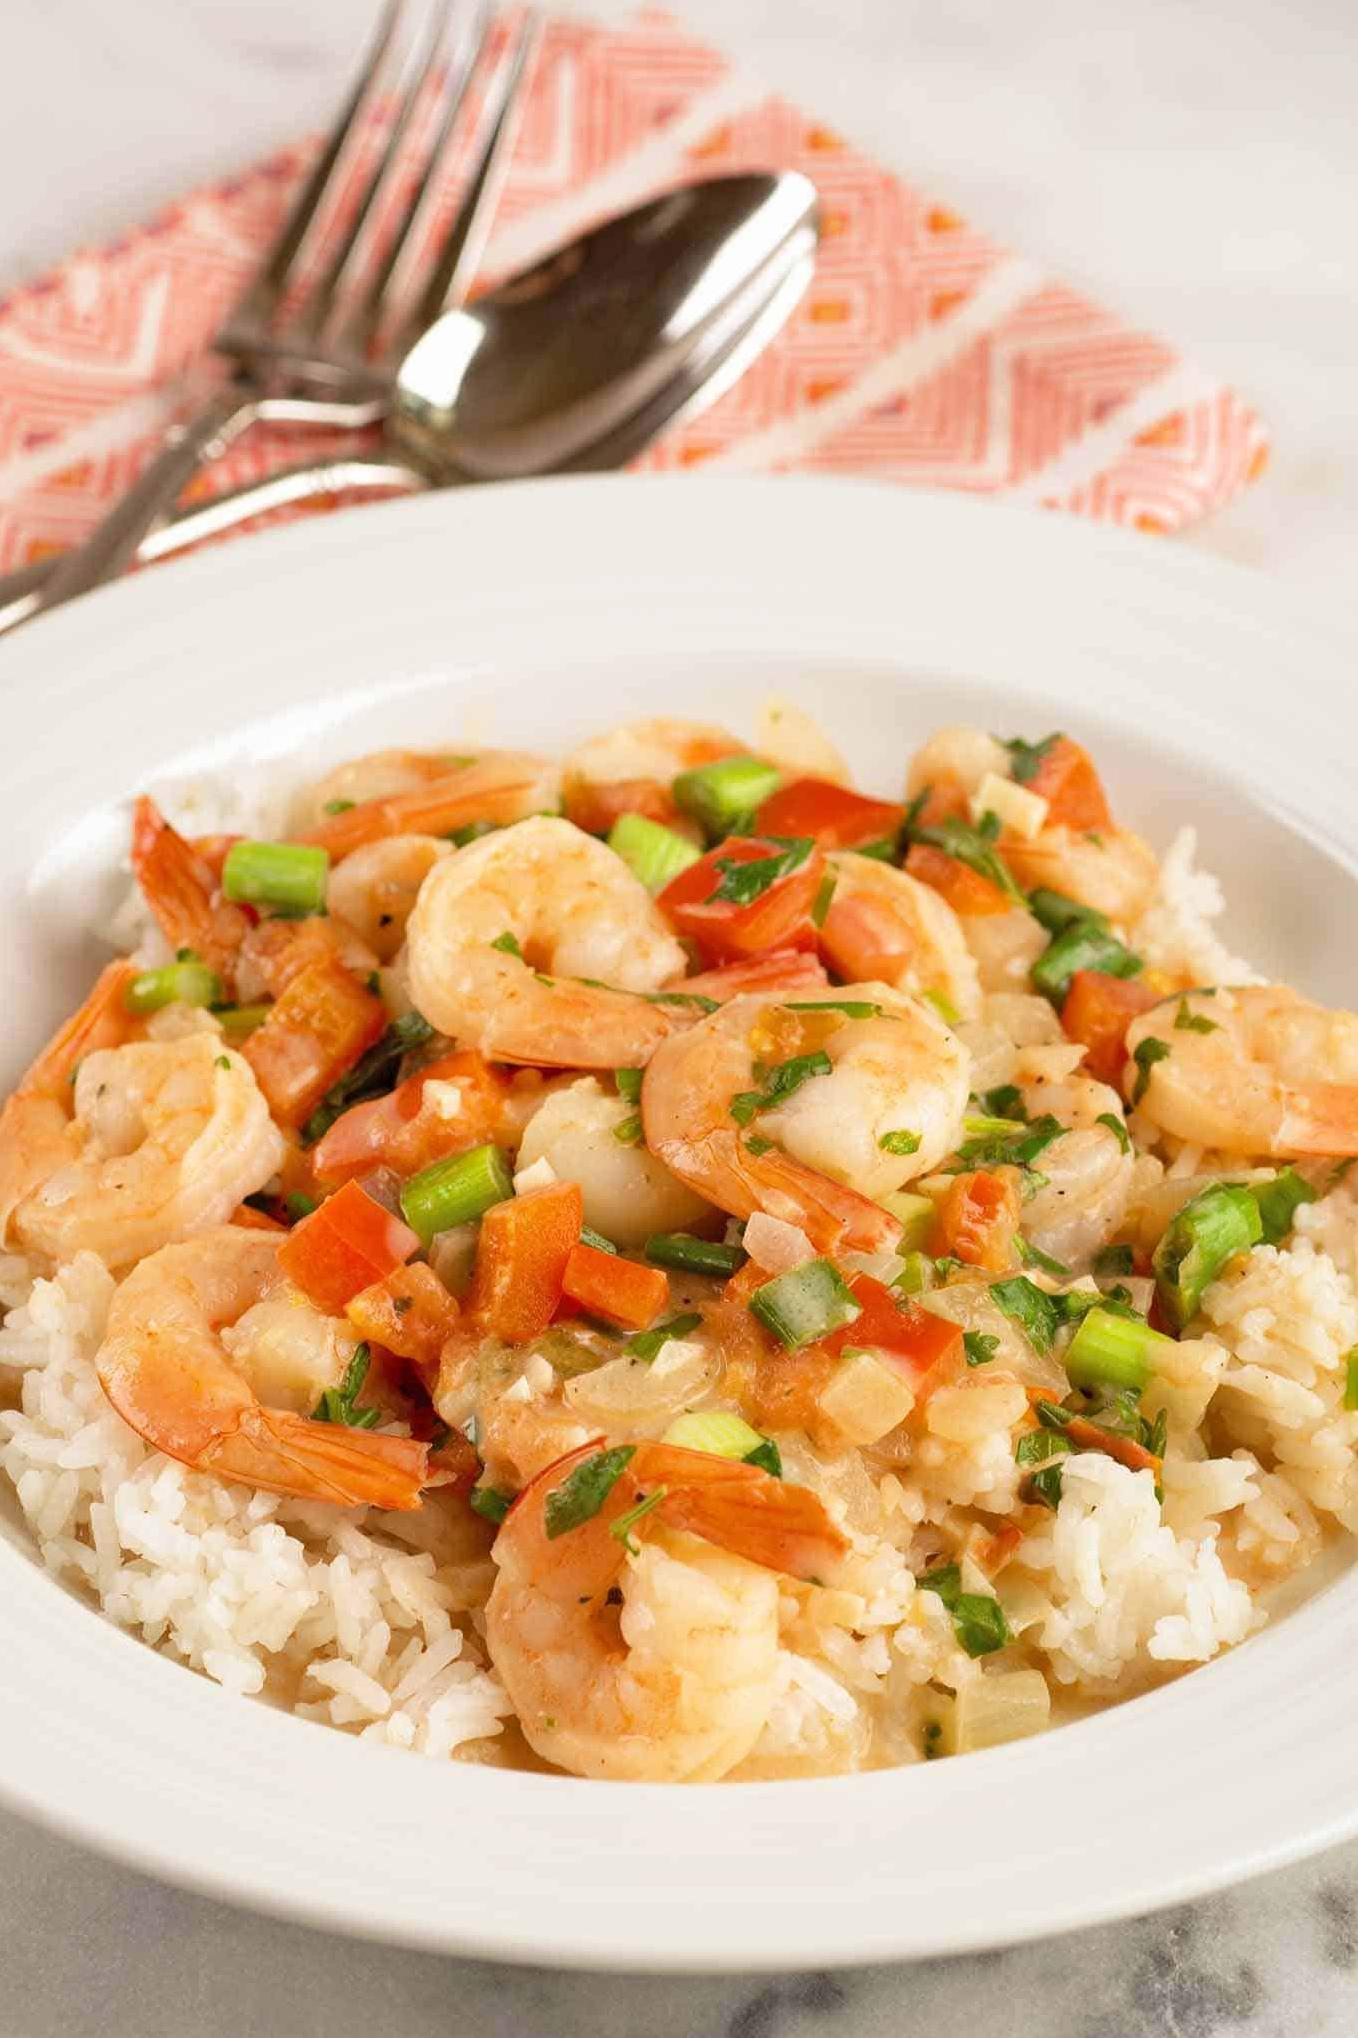  The shrimp are perfectly cooked and will melt in your mouth.